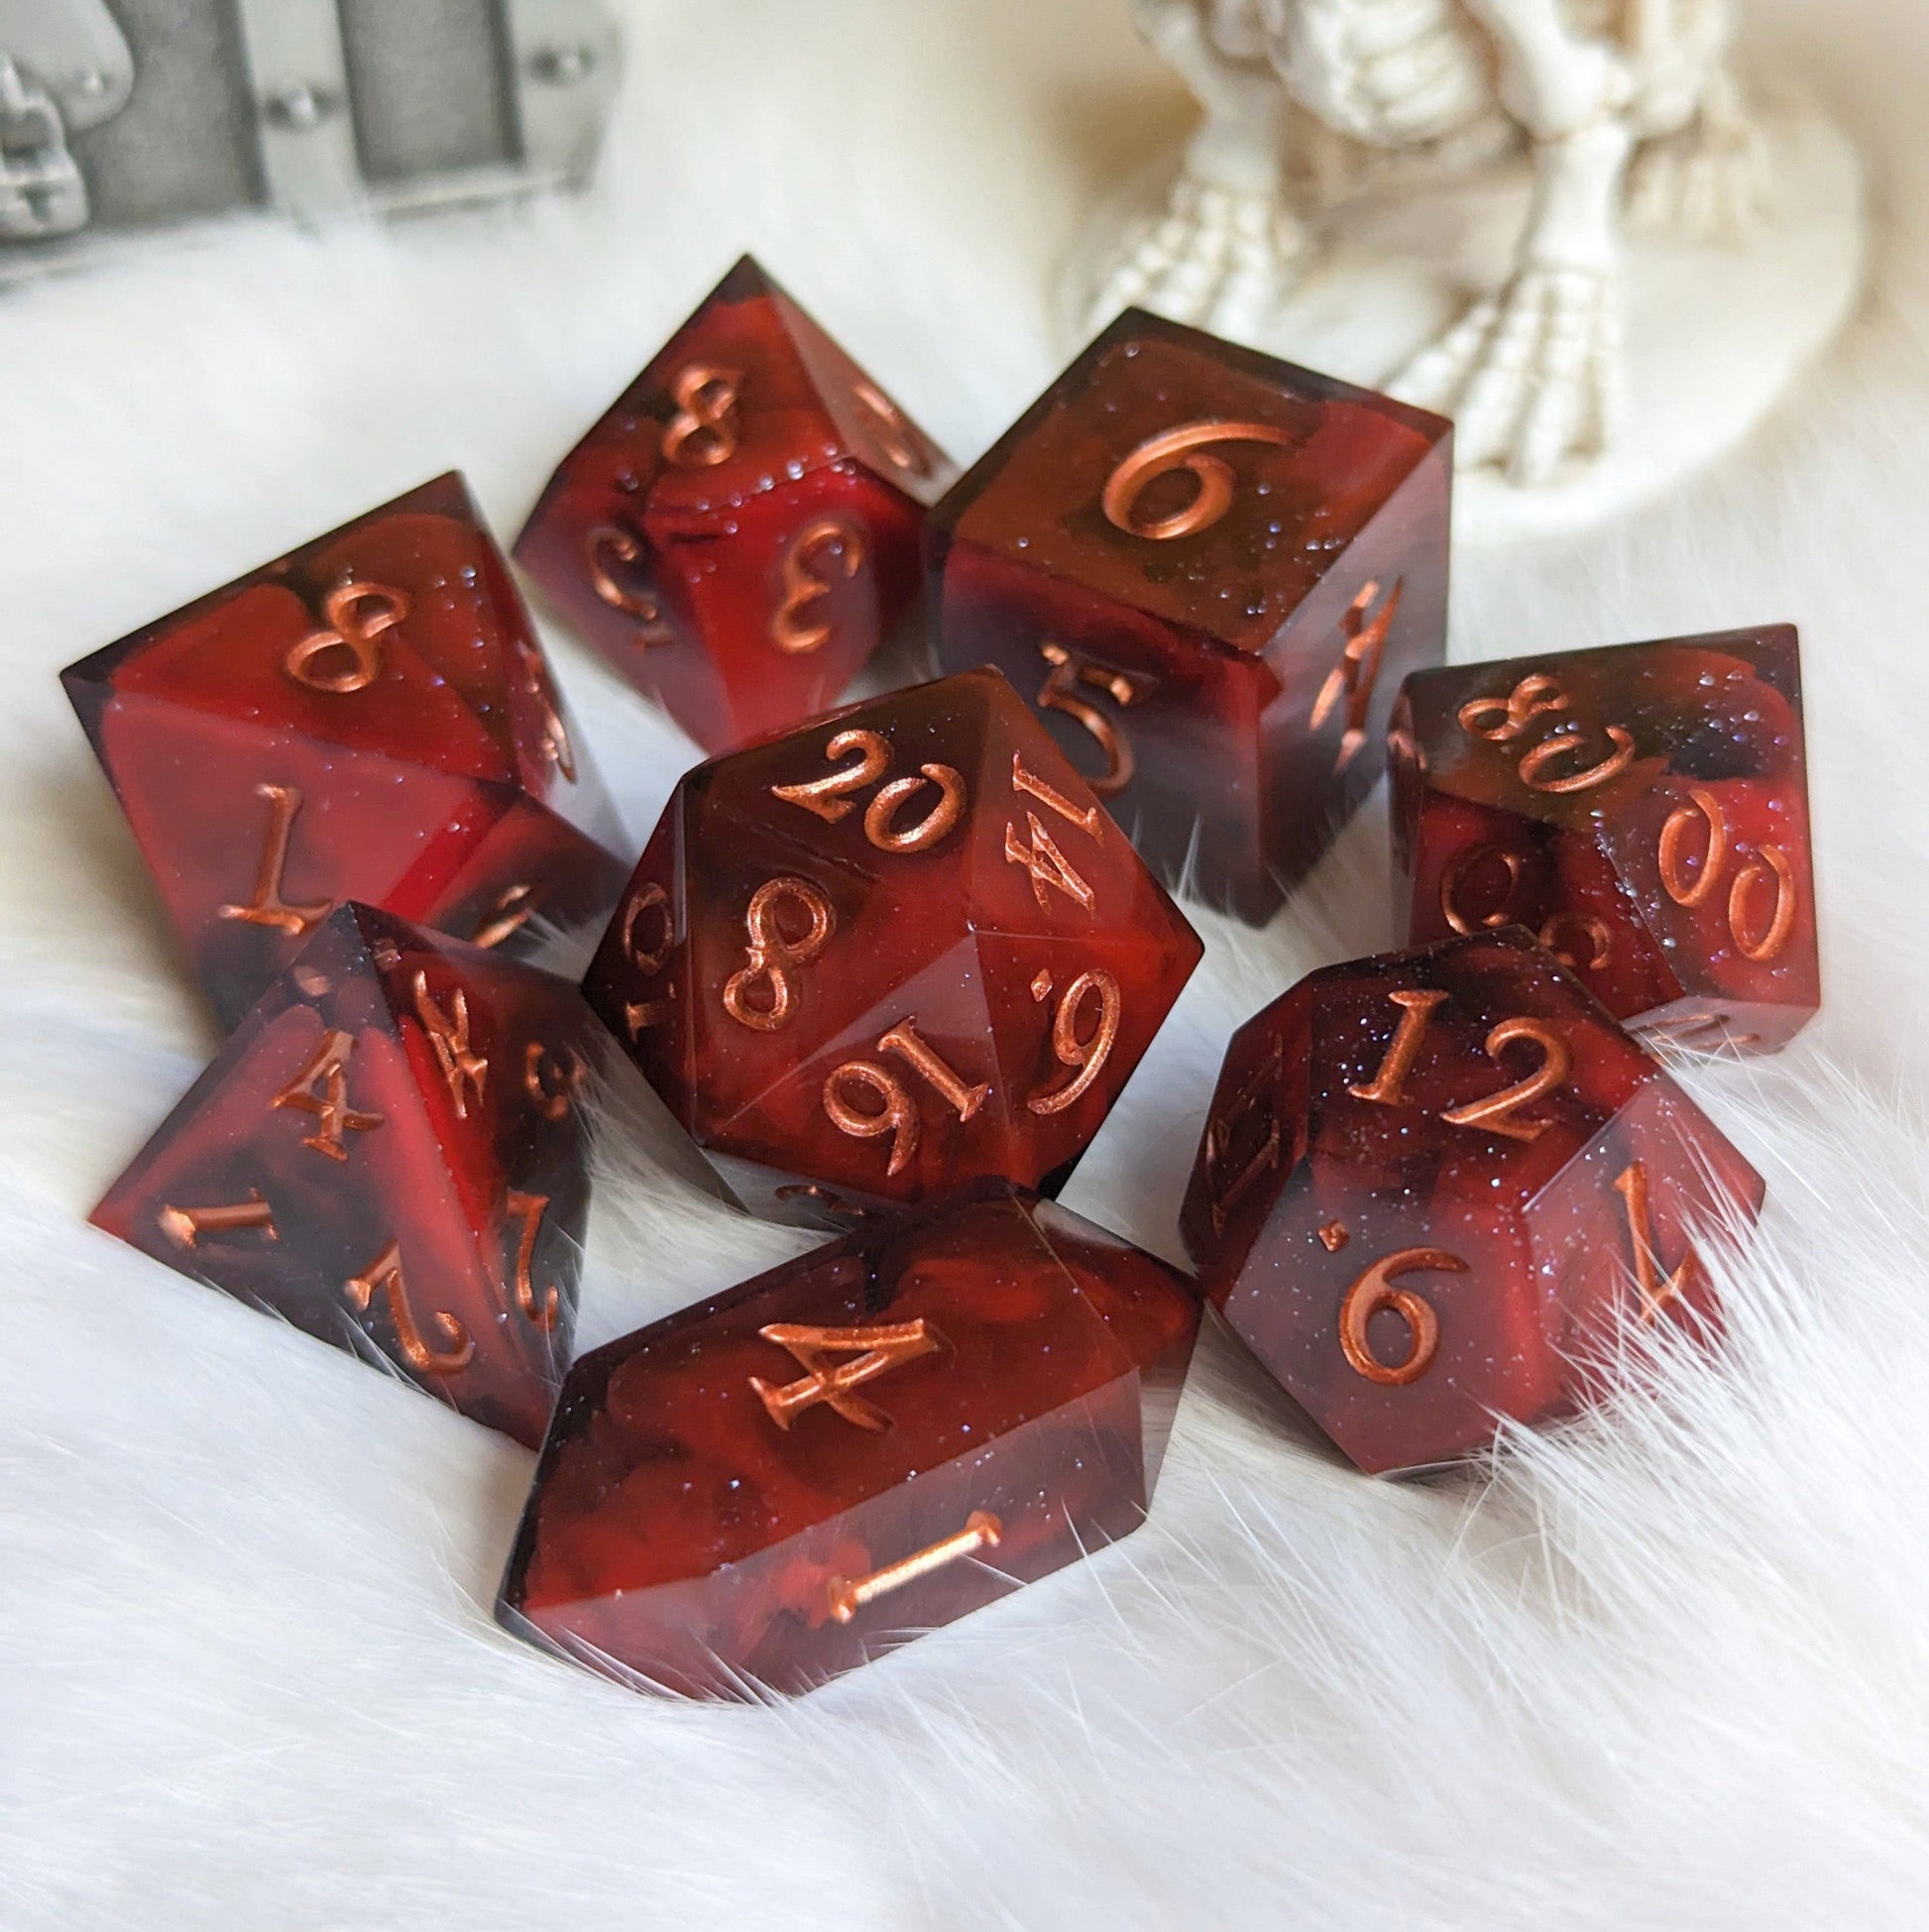 Blood and Smoke DnD Dice Set. Red and Black Marble